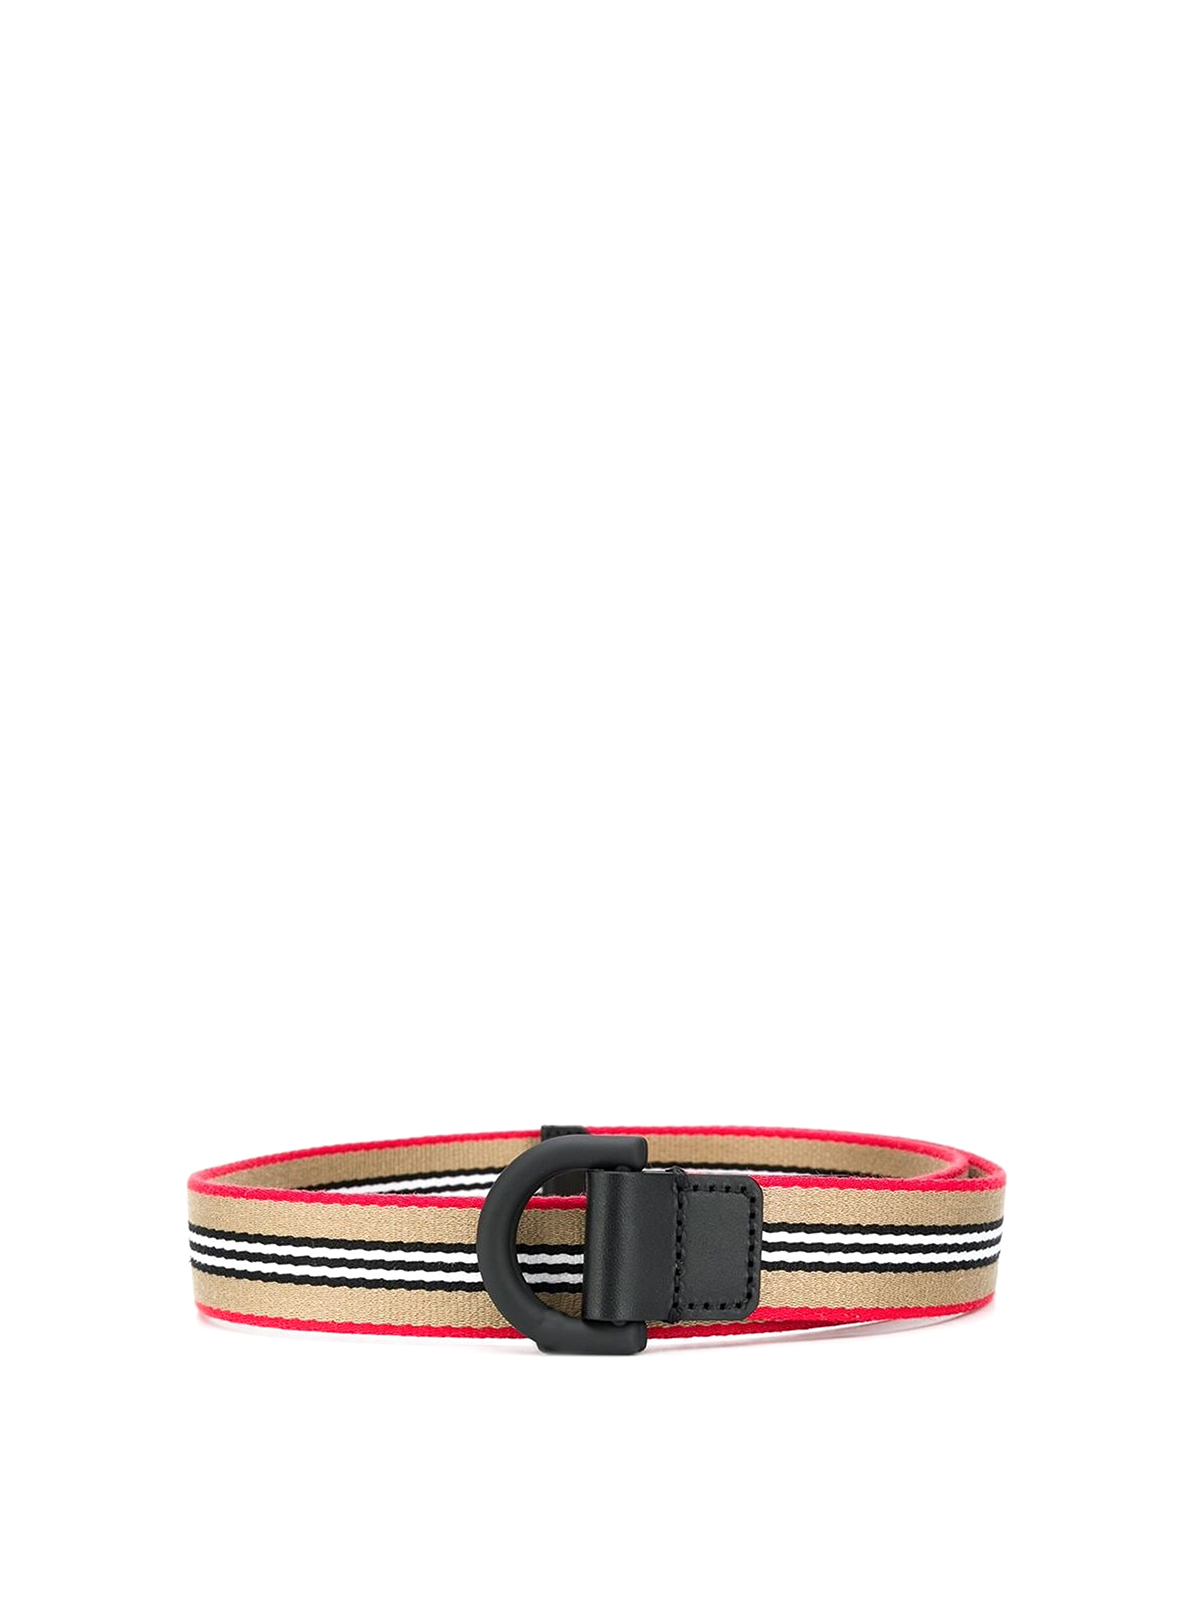 Burberry Red Double D Ring Belt Burberry